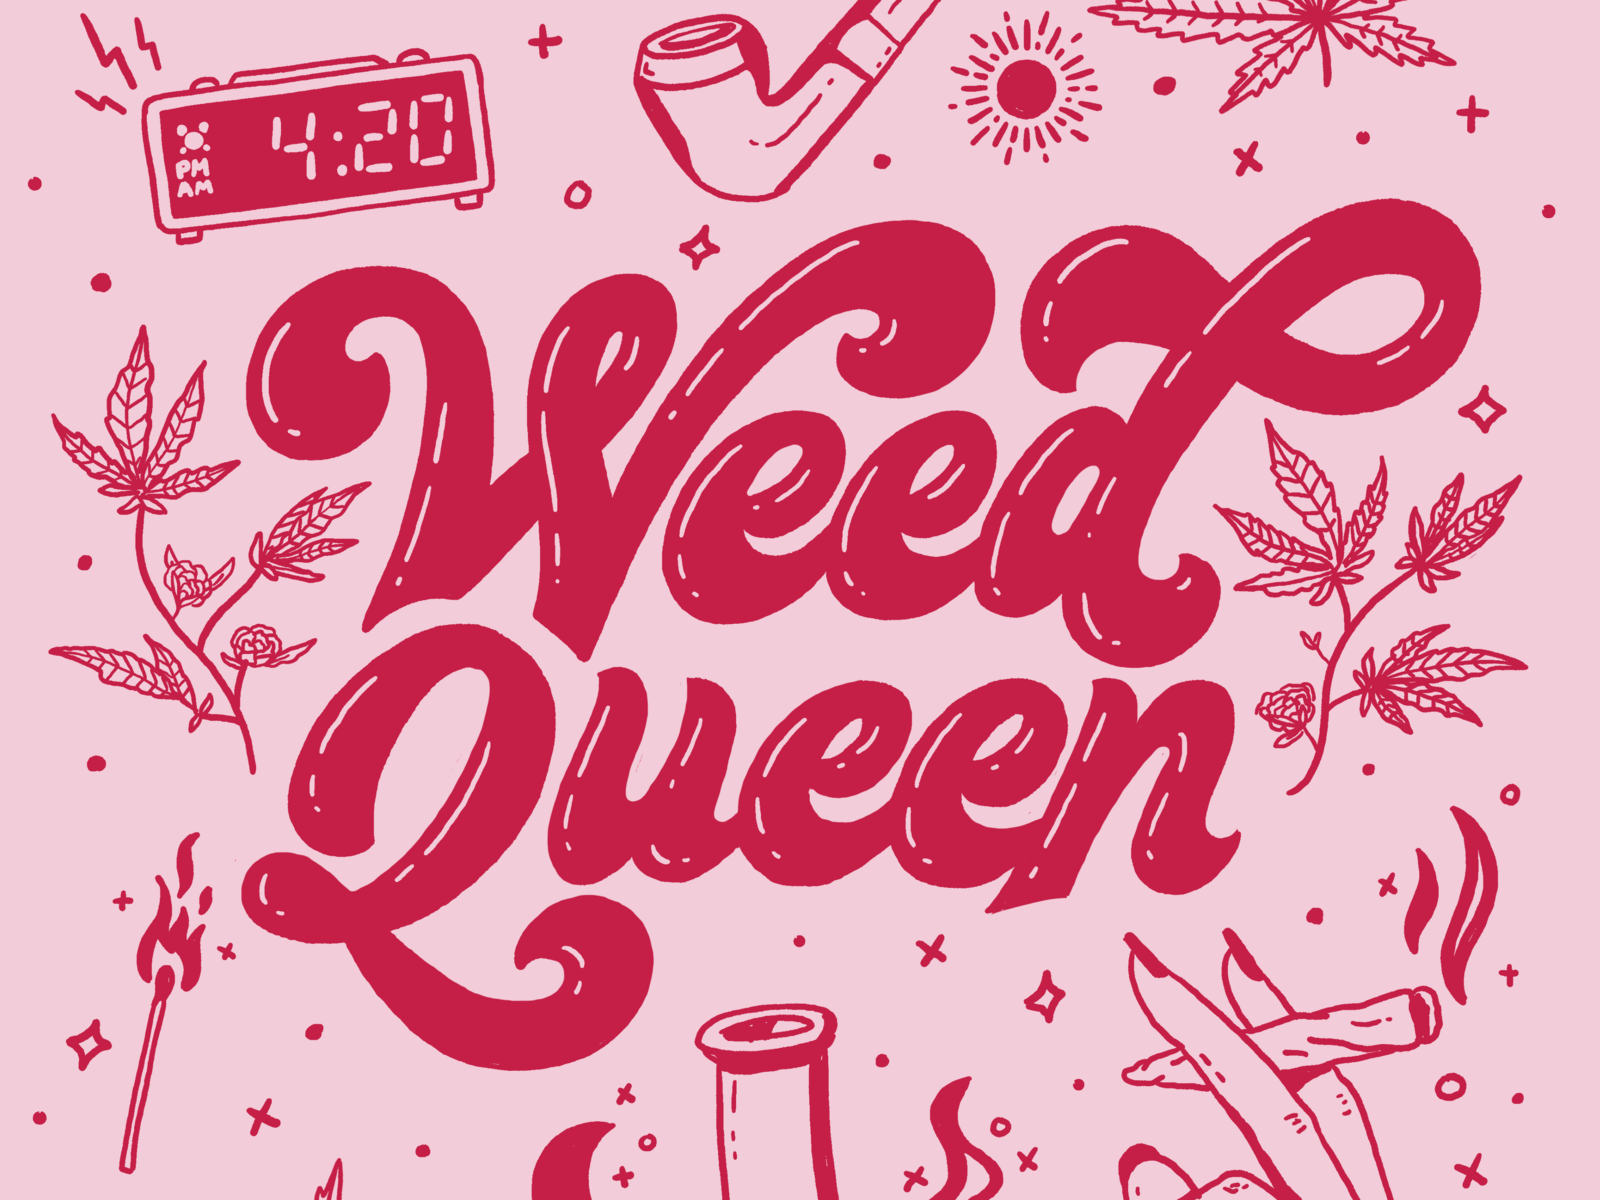 Weed Queen by Dina Rodriguez on Dribbble